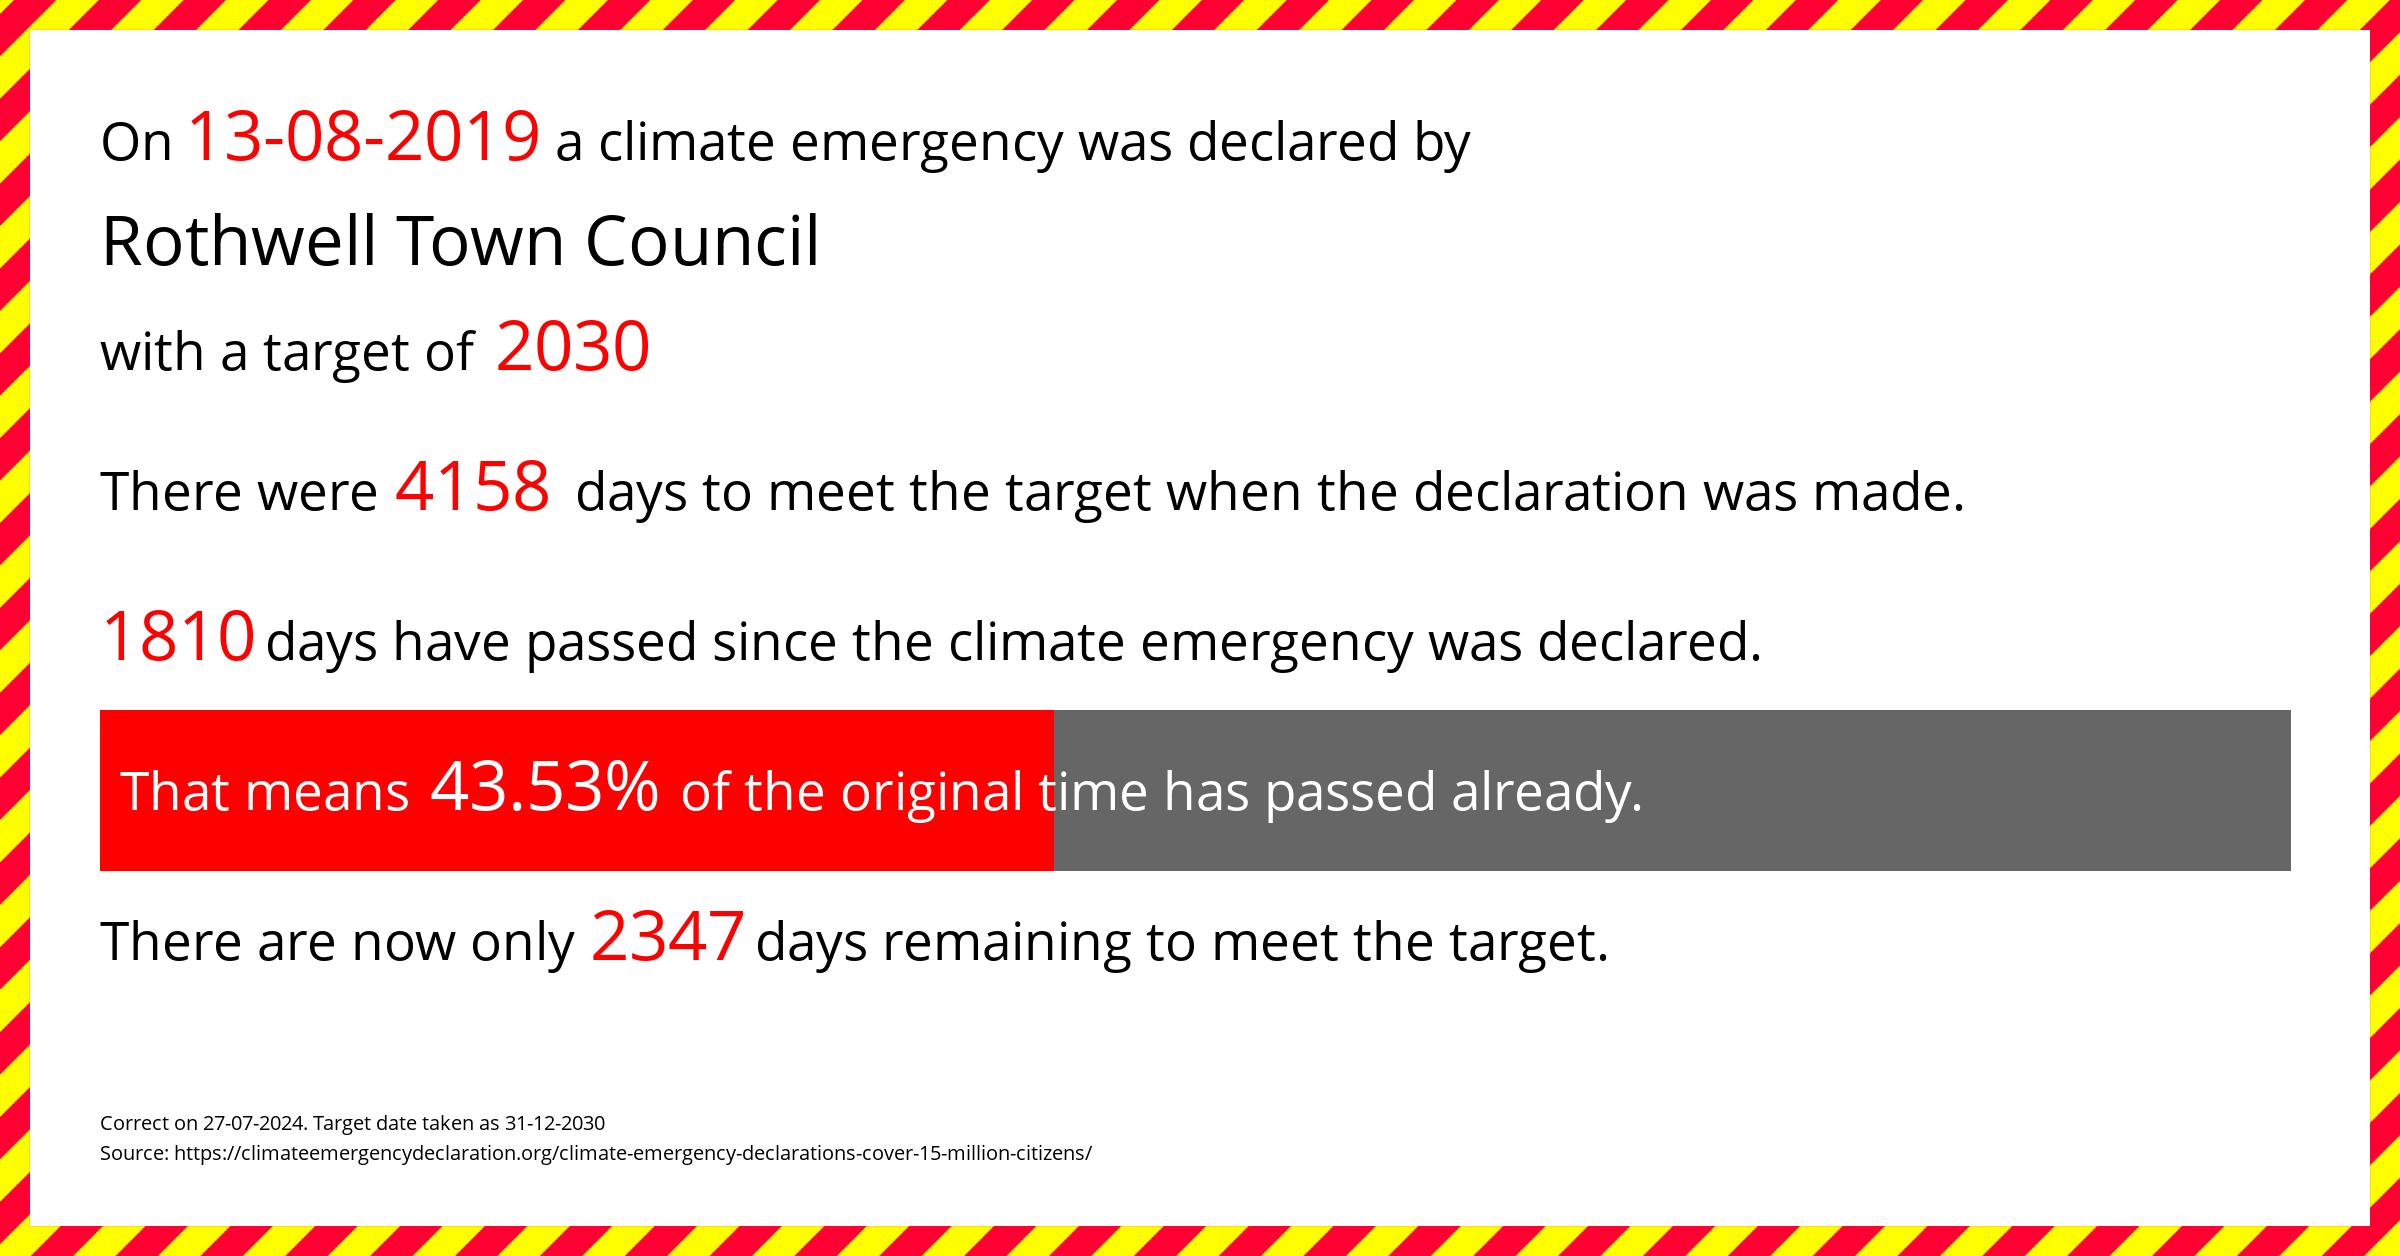 Rothwell Town Council declared a Climate emergency on Tuesday 13th August 2019, with a target of 2030.